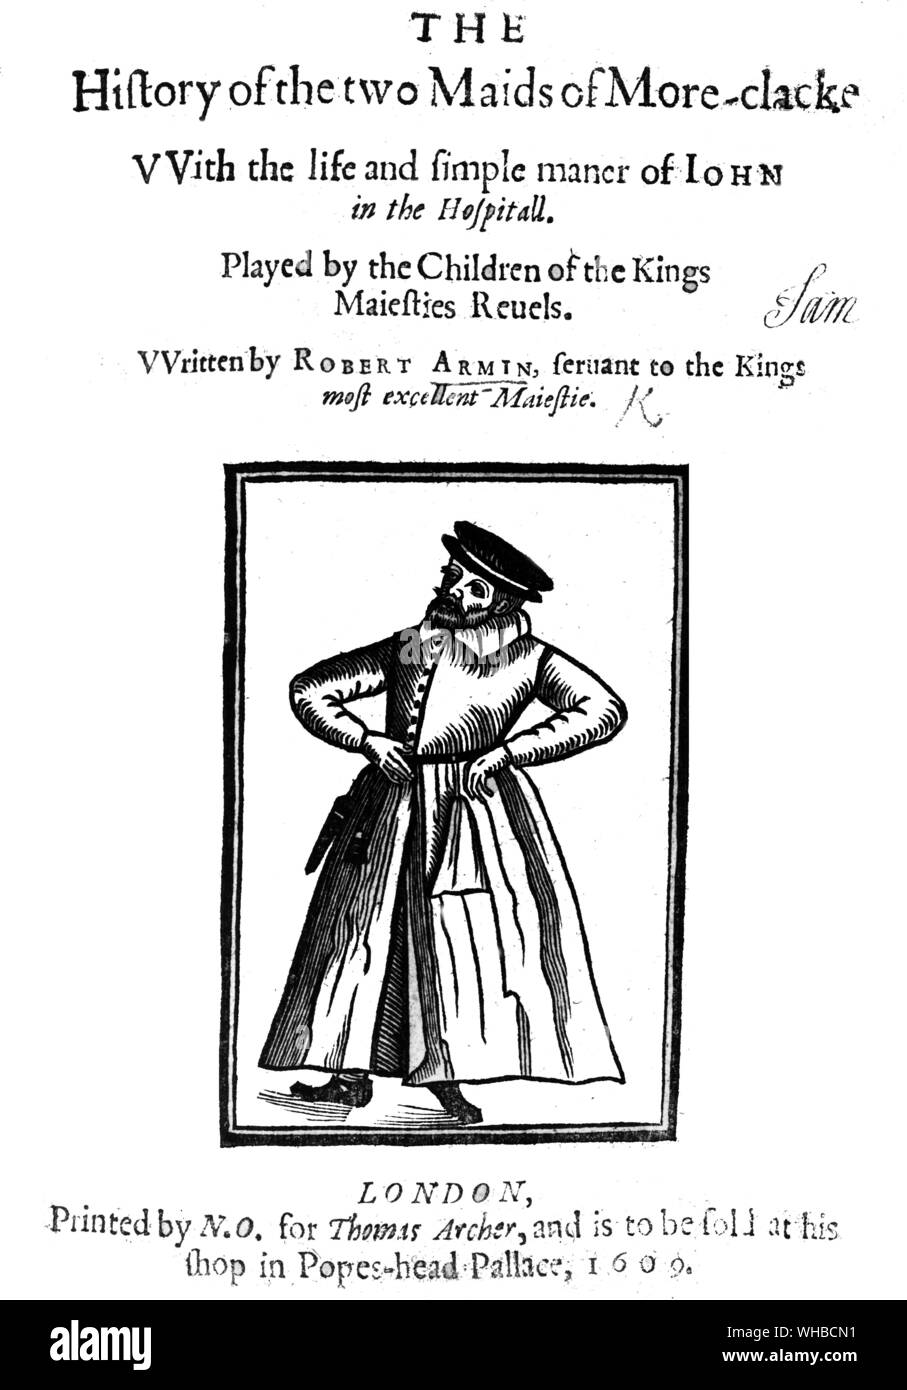 Woodcut from the title page of The History of the Two Maids of More Clacke by Robert Armin , 1609 .Robert Armin replaced William Kemp as Shakespeares comedian , he was a much more subtle comic Stock Photo